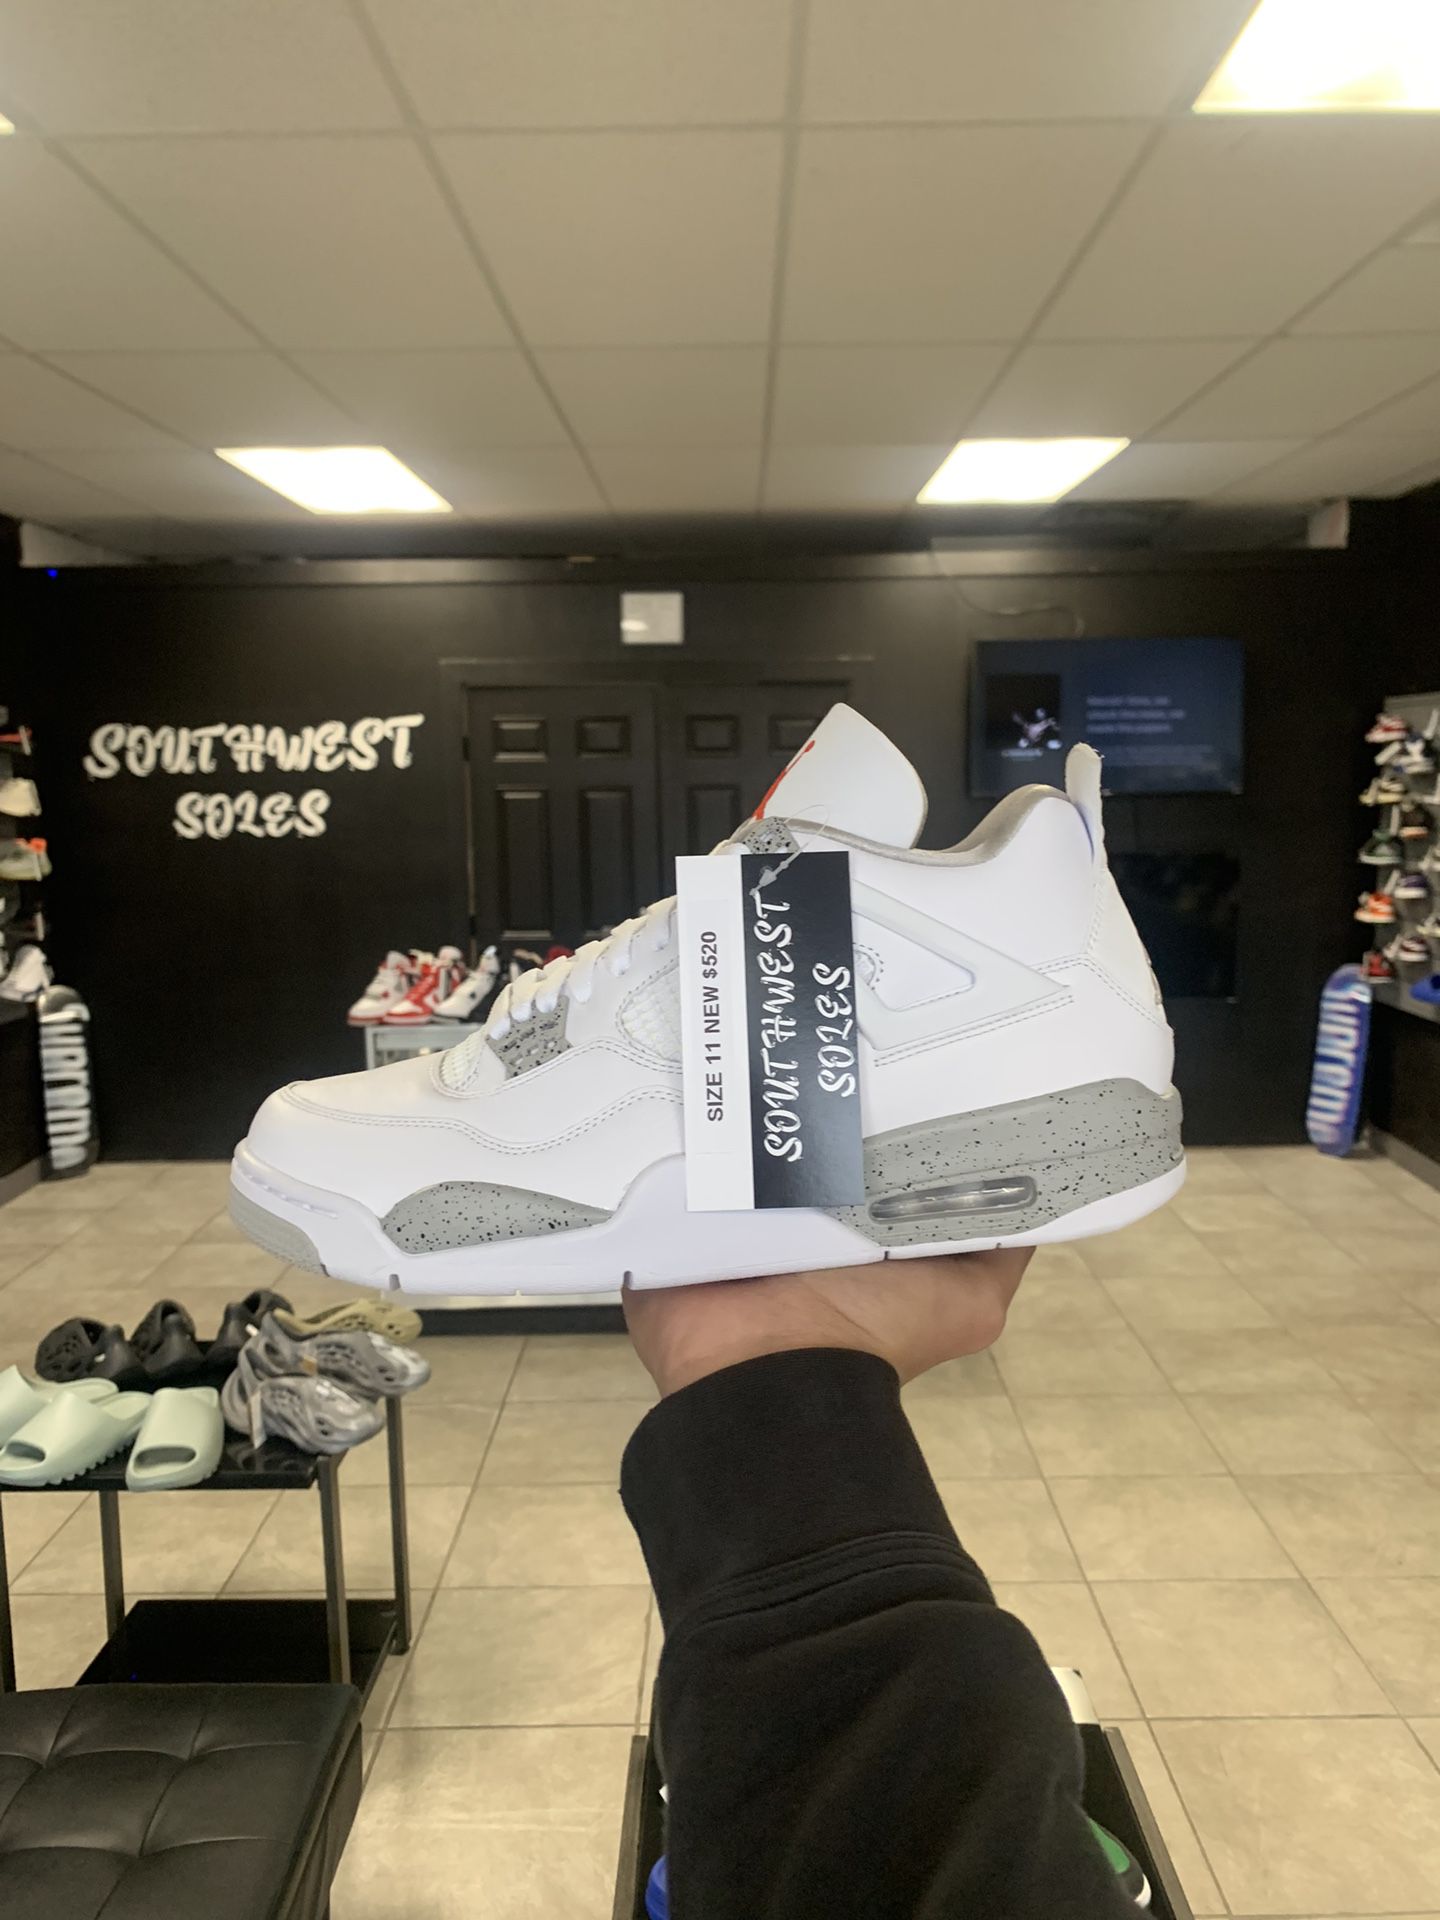 Jordan 4 White Oreo Size 11 Available In Store! 